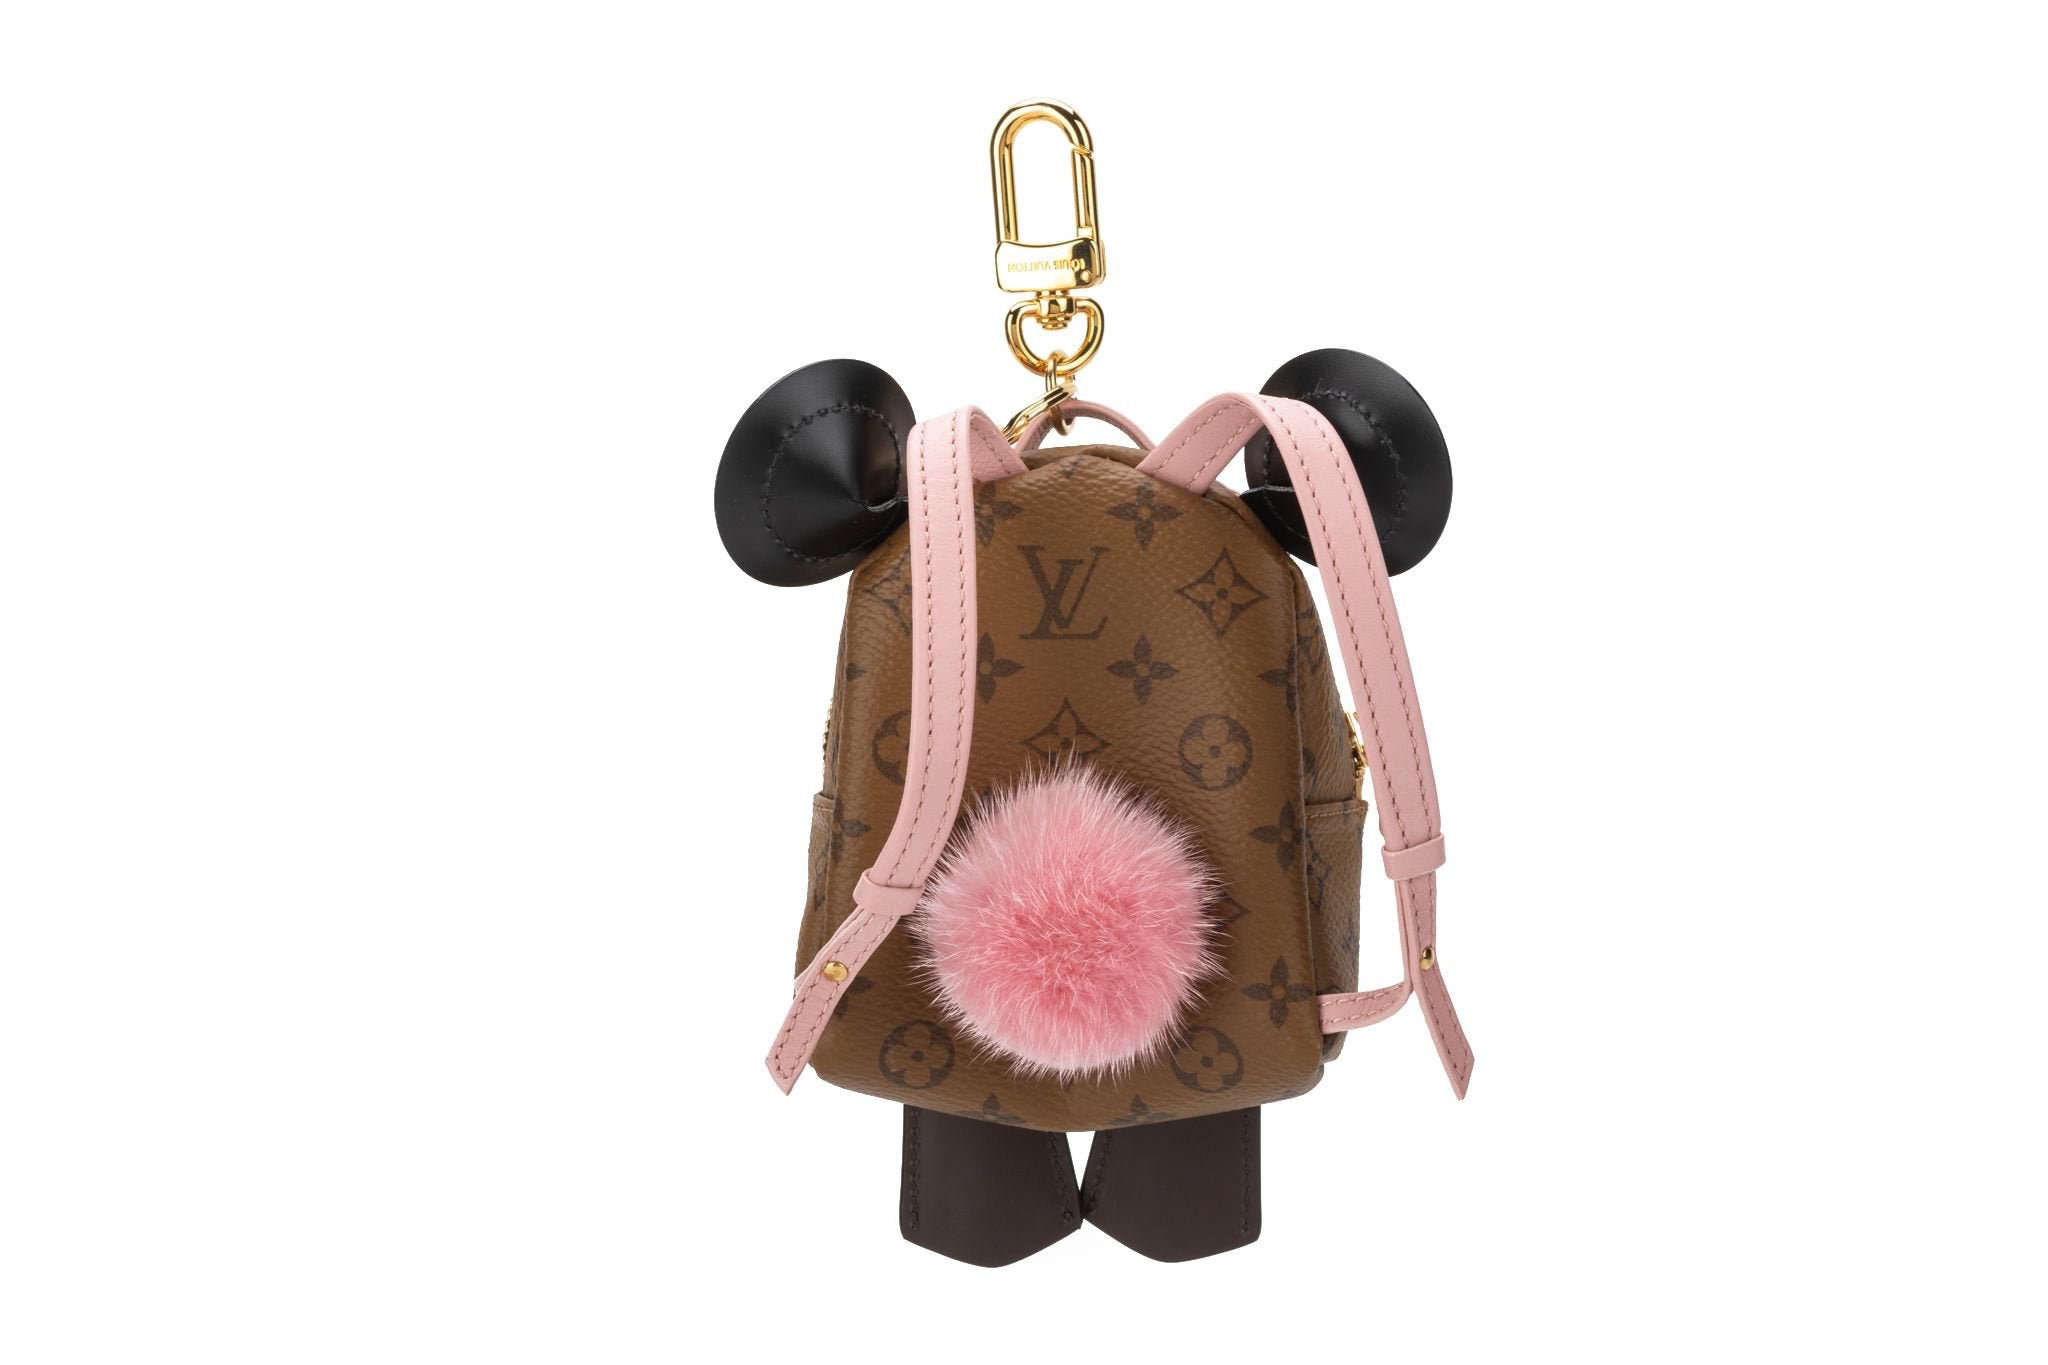 vuitton pink backpack